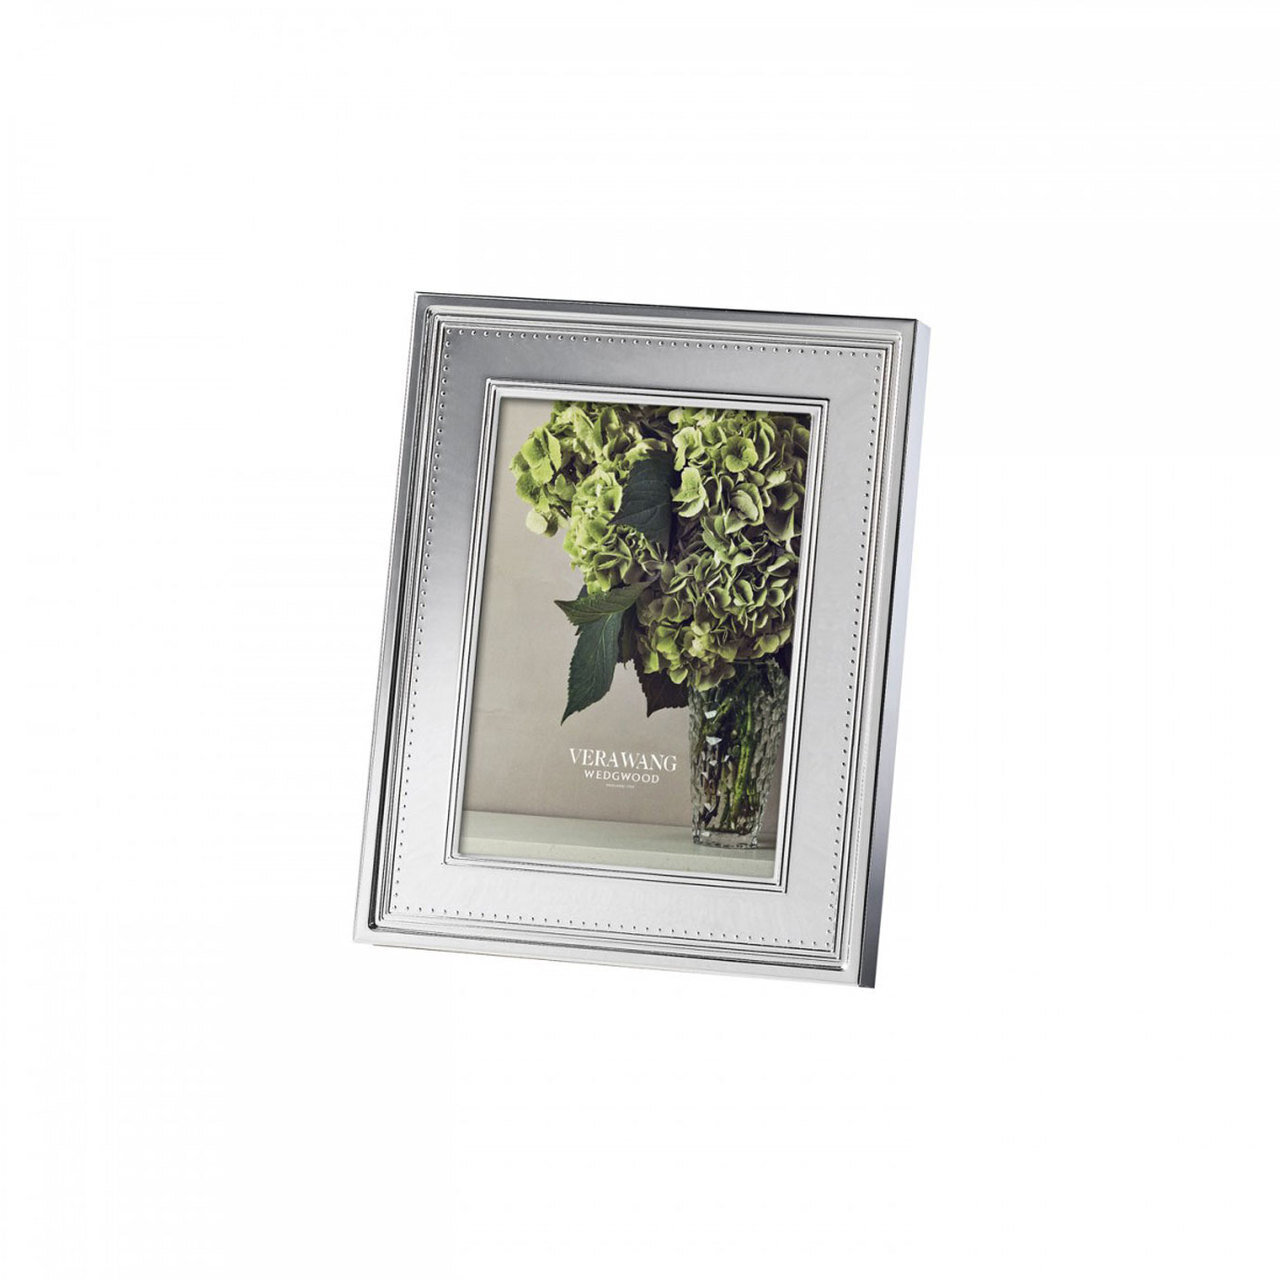 Vera Wang Grosgrain Picture Frame 5 x 7 Inch